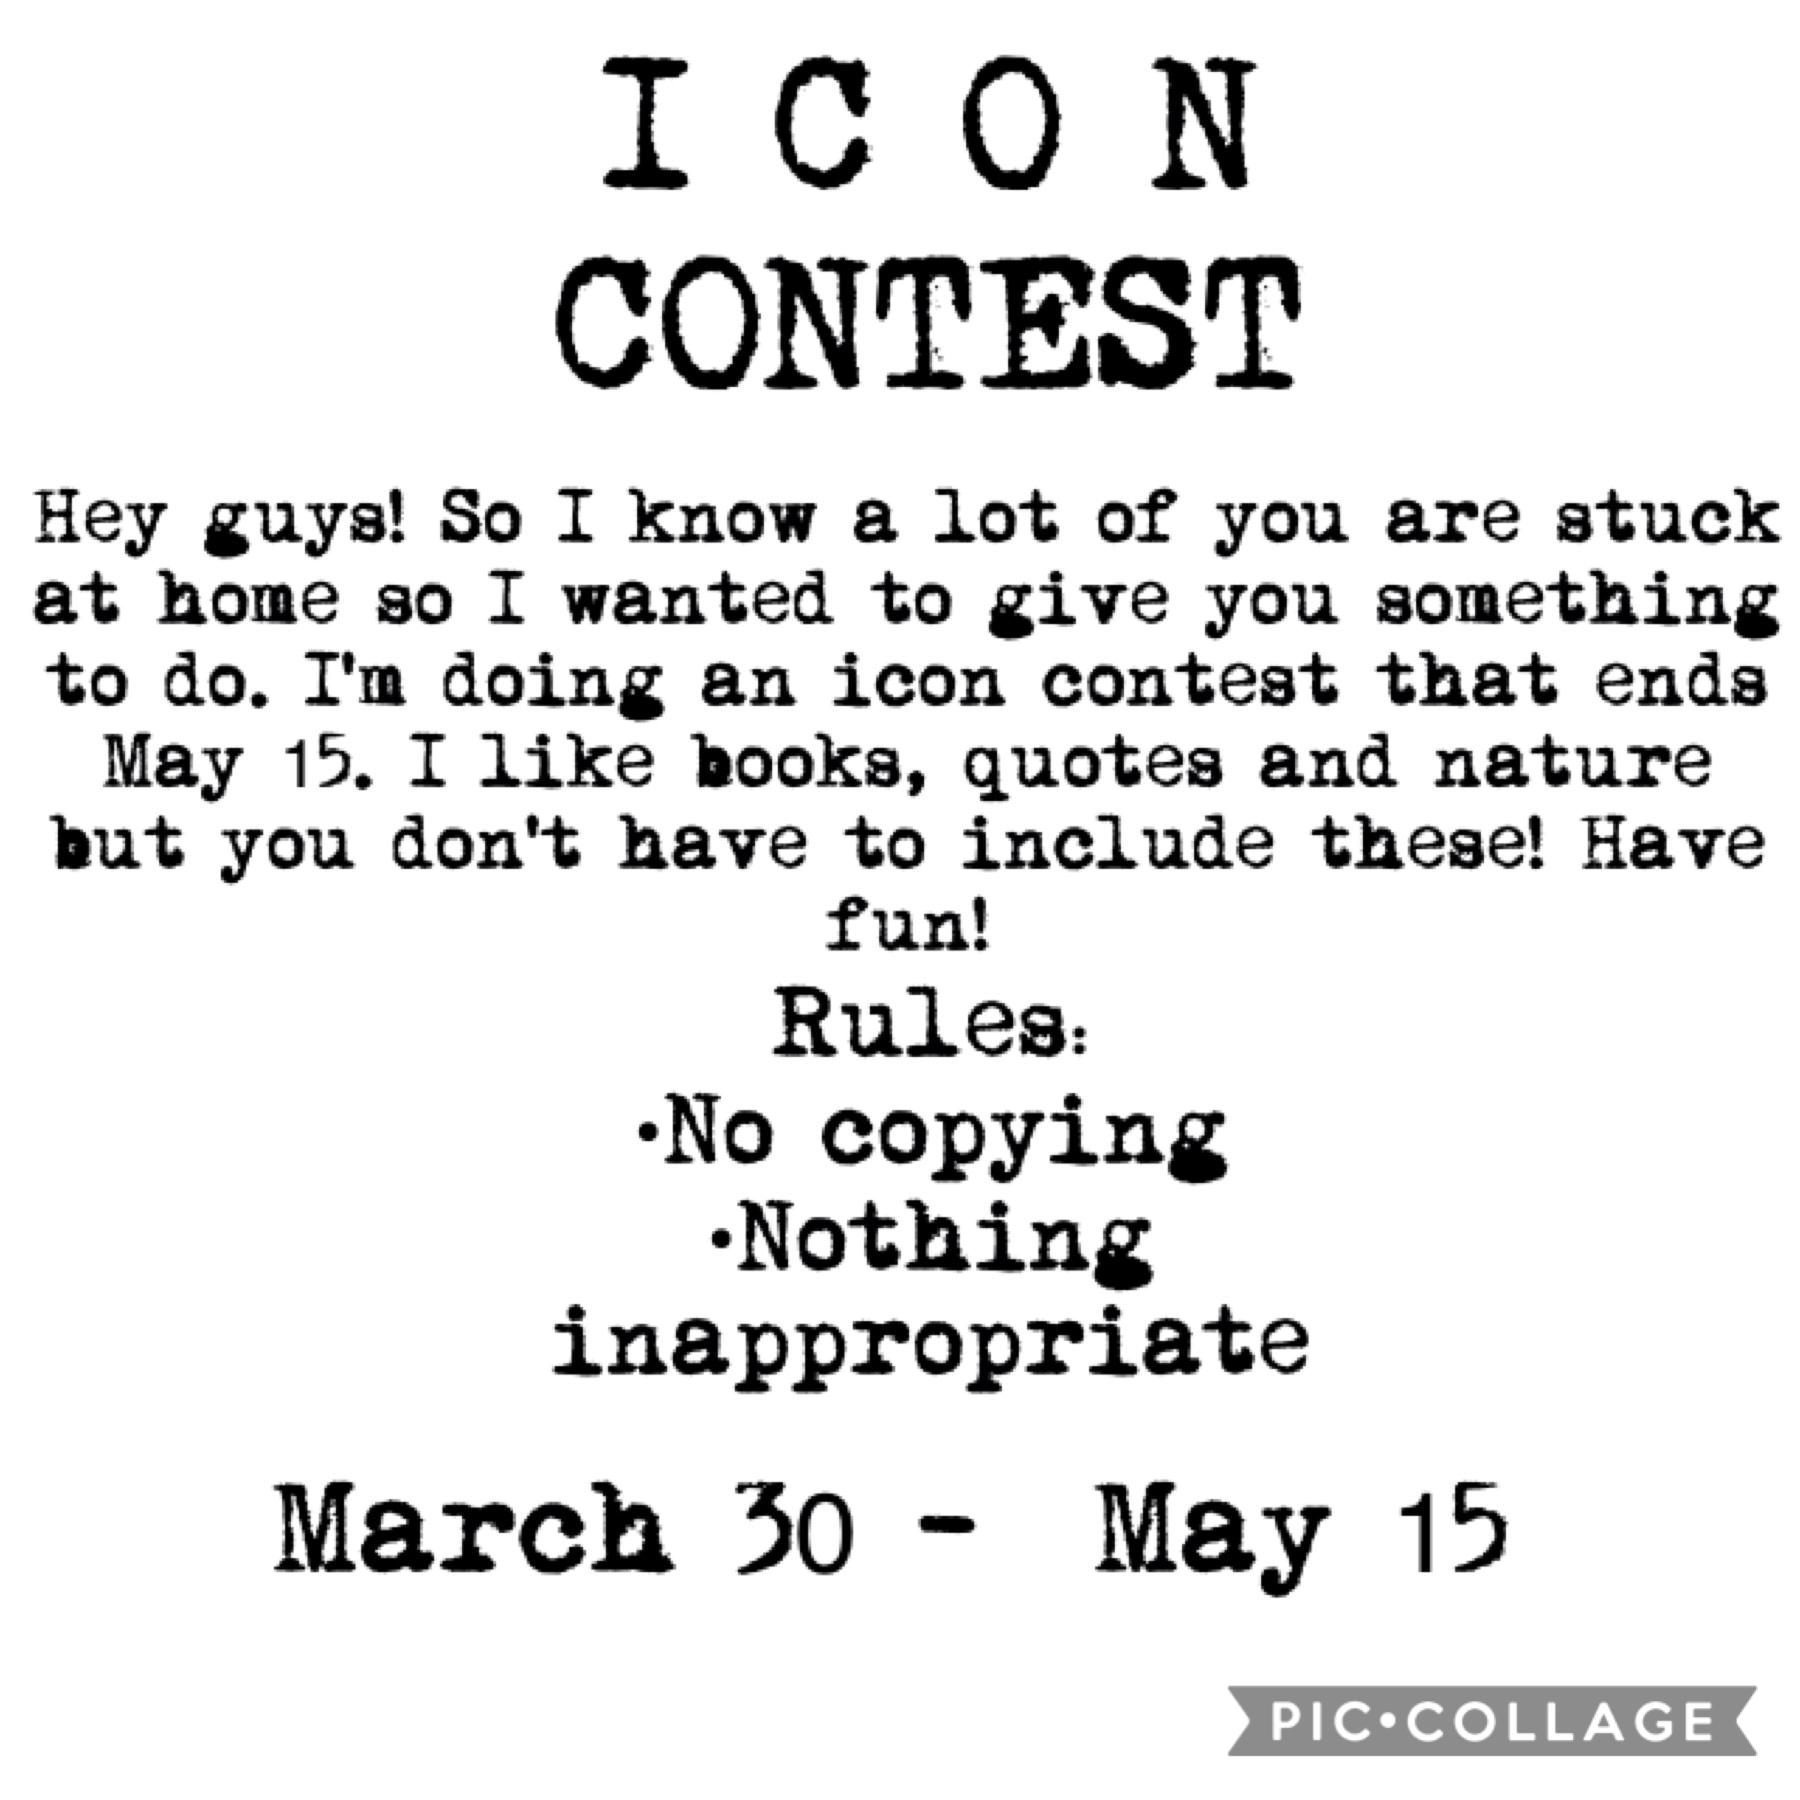 TAP 
Hey guys! March 30 to May 15 I will be having an Icon contest! I'm still deciding  what the winner will receive. More information will be in the comments!